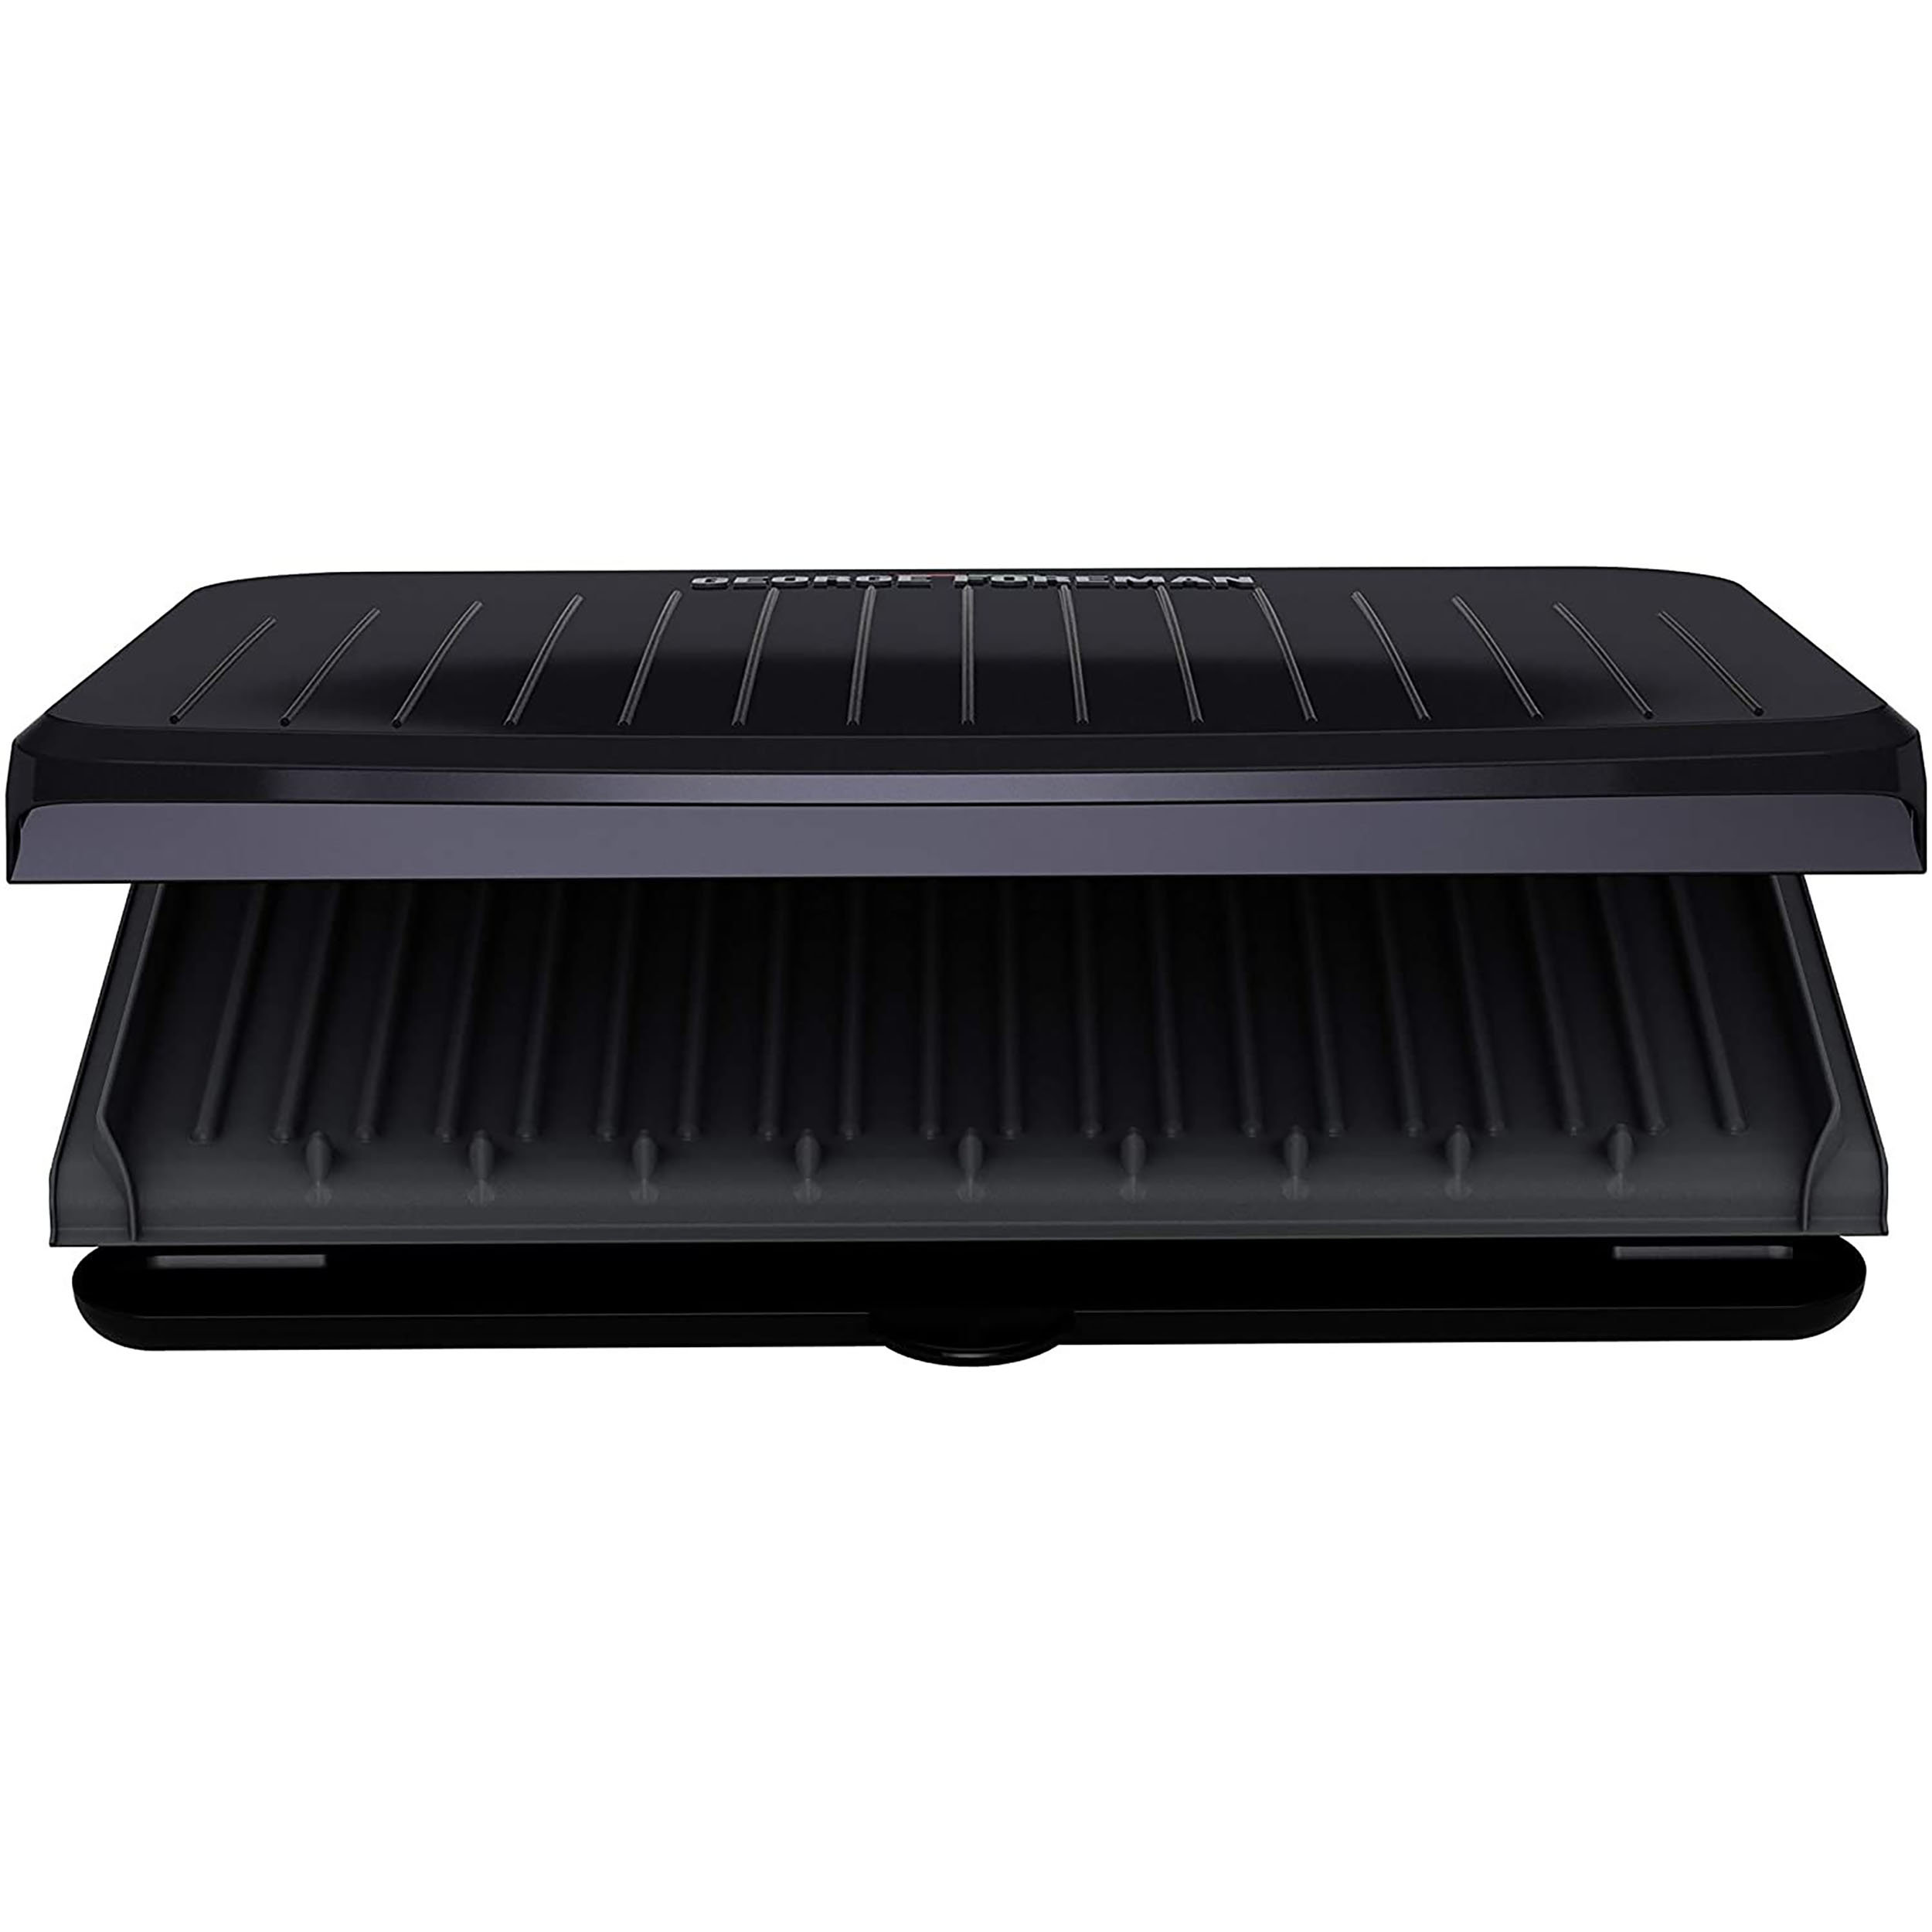 George Foreman Removable Plate Rapid Grill & Panini Press